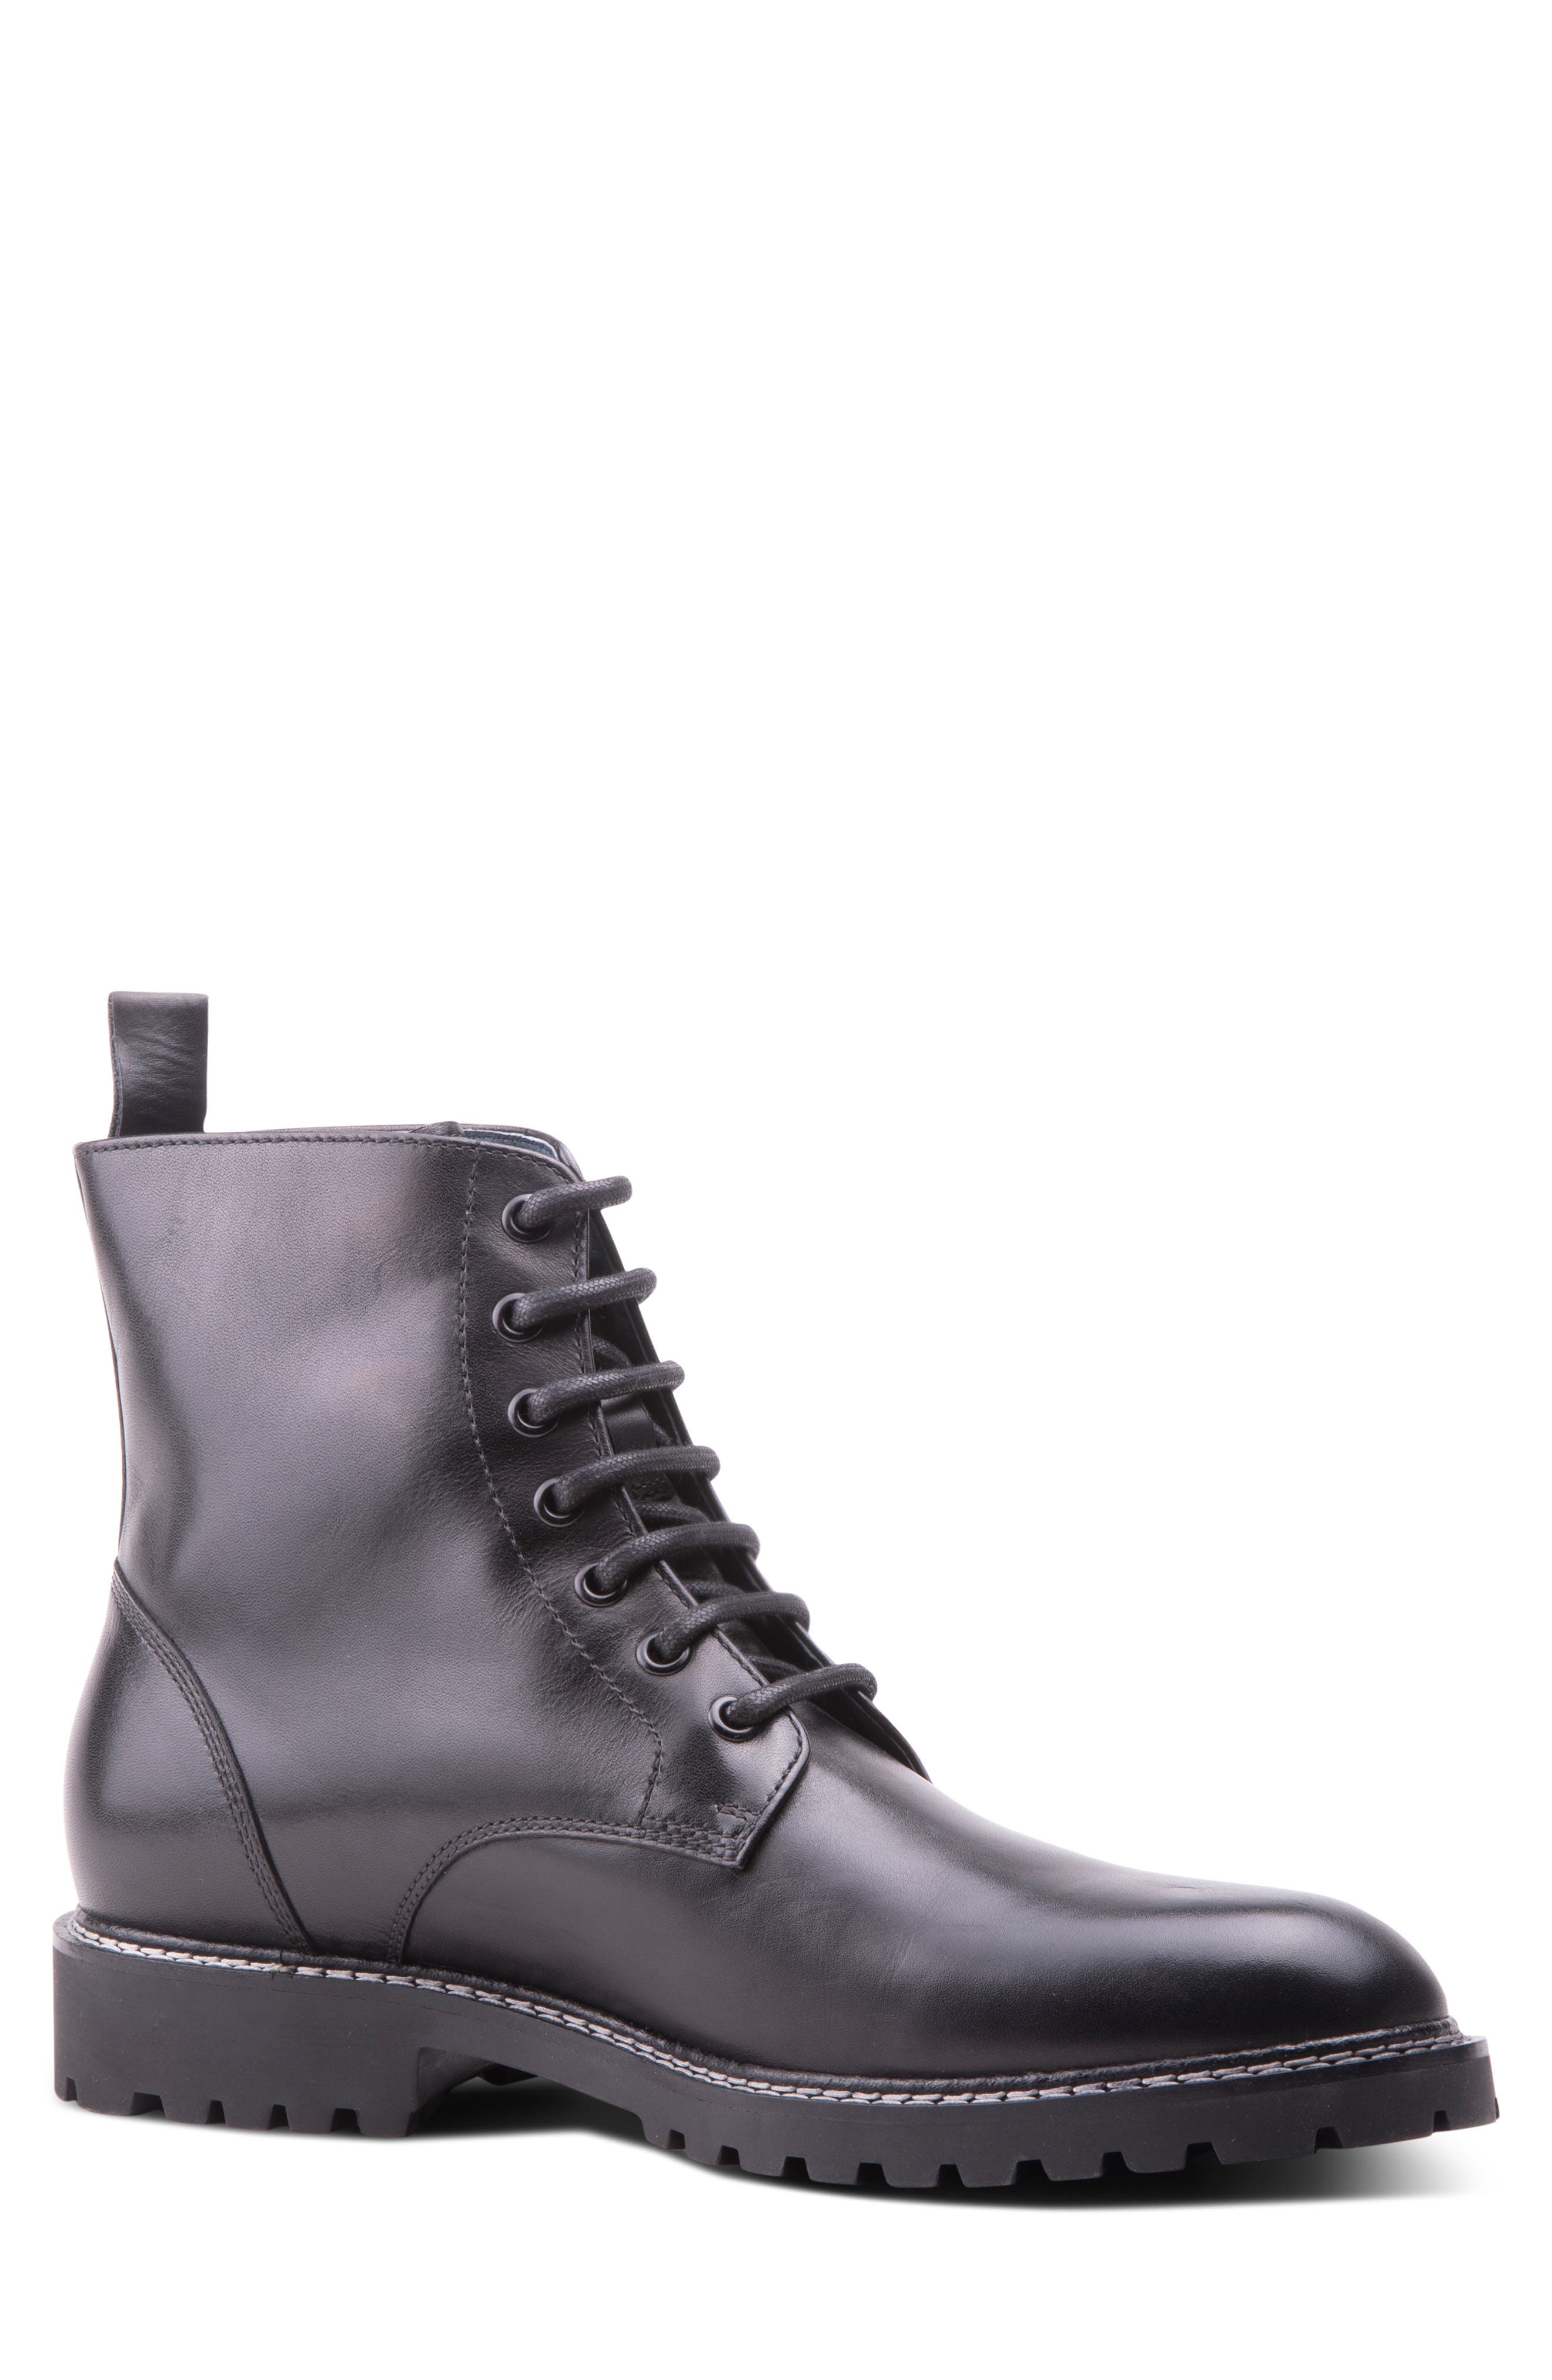 BLAKE MCKAY Townsend Leather Boot